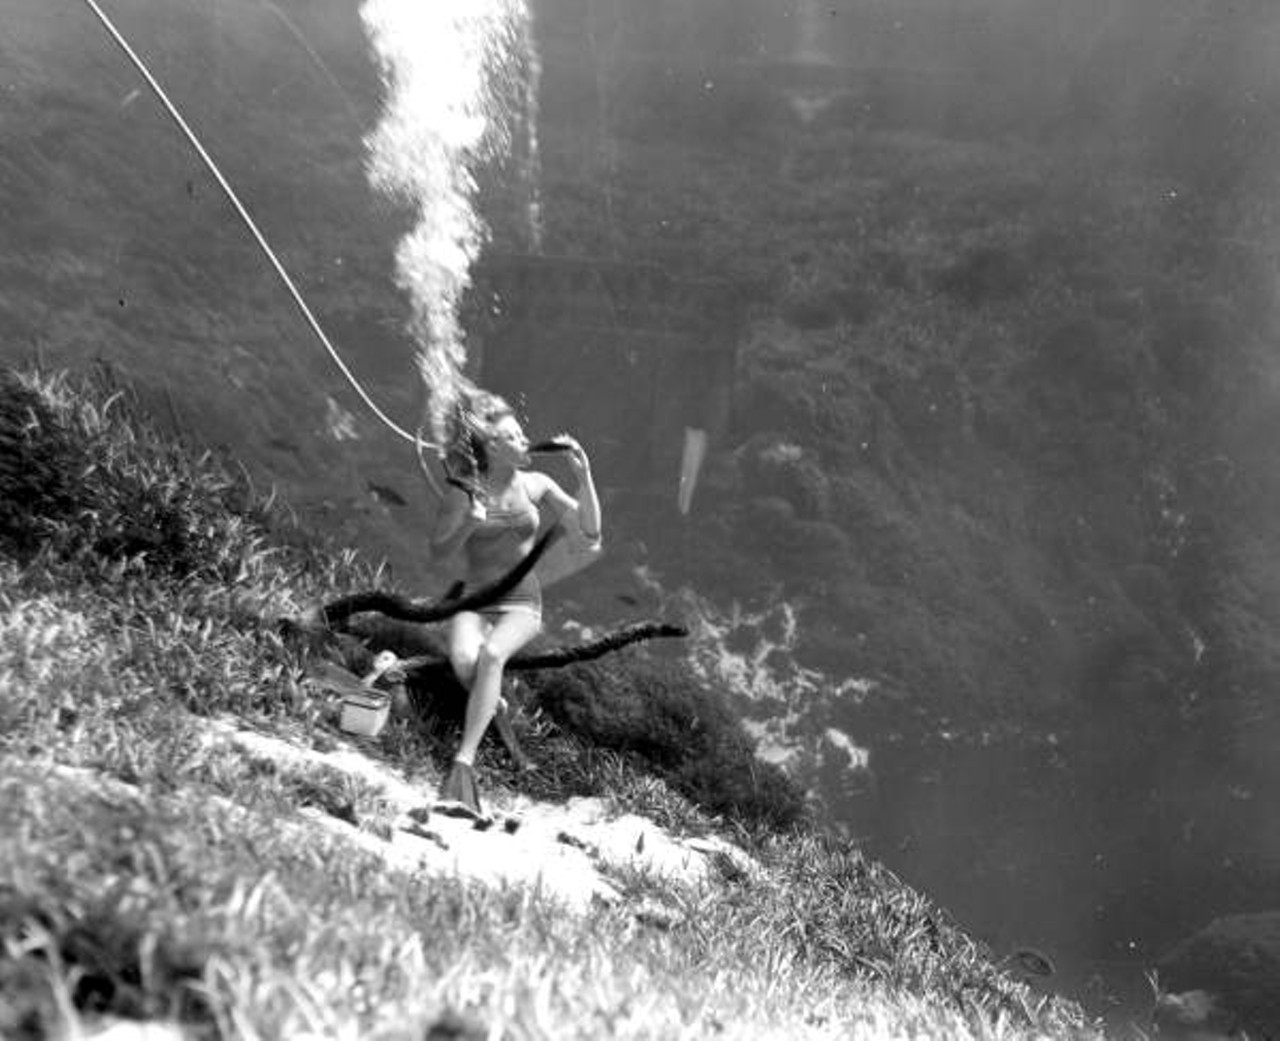 Weeki Wachee Springs
Weeki Wachee Springs was long famous for its live underwater mermaid performances, like this one captured in 1950. Floridians and tourists flocked to the site to enjoy the clear waters and revel in the fantasy of elegant sea-people.